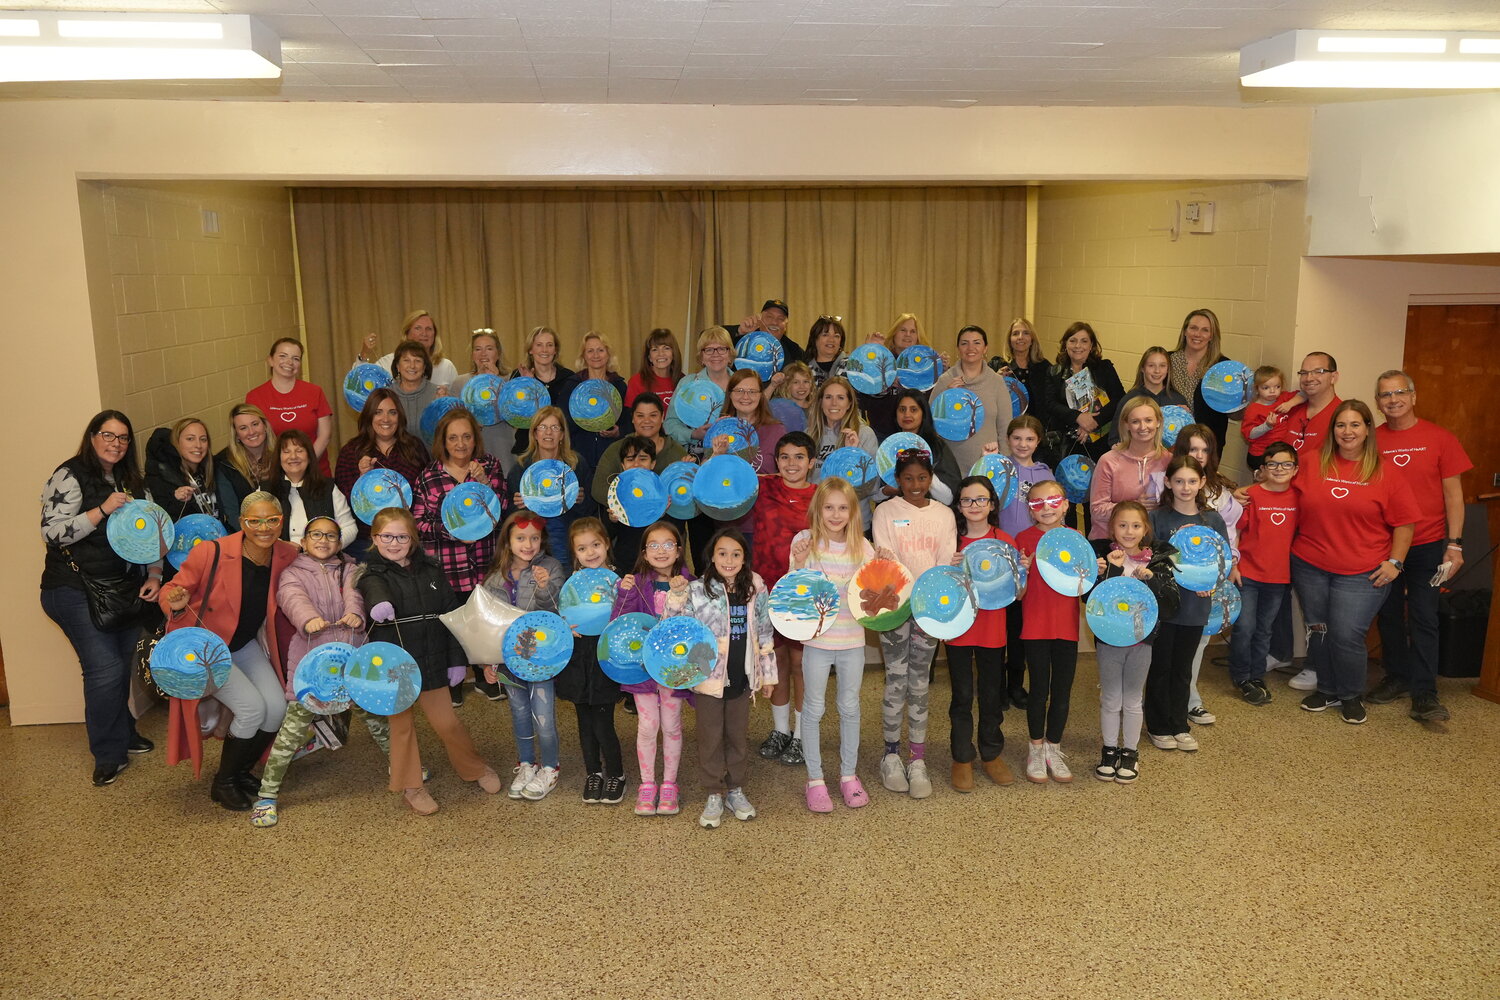 Julianna’s Works of HEART’s paint night was well attended, and raised over $7,000. It was held at the Sacred Heart Roman Catholic Church.